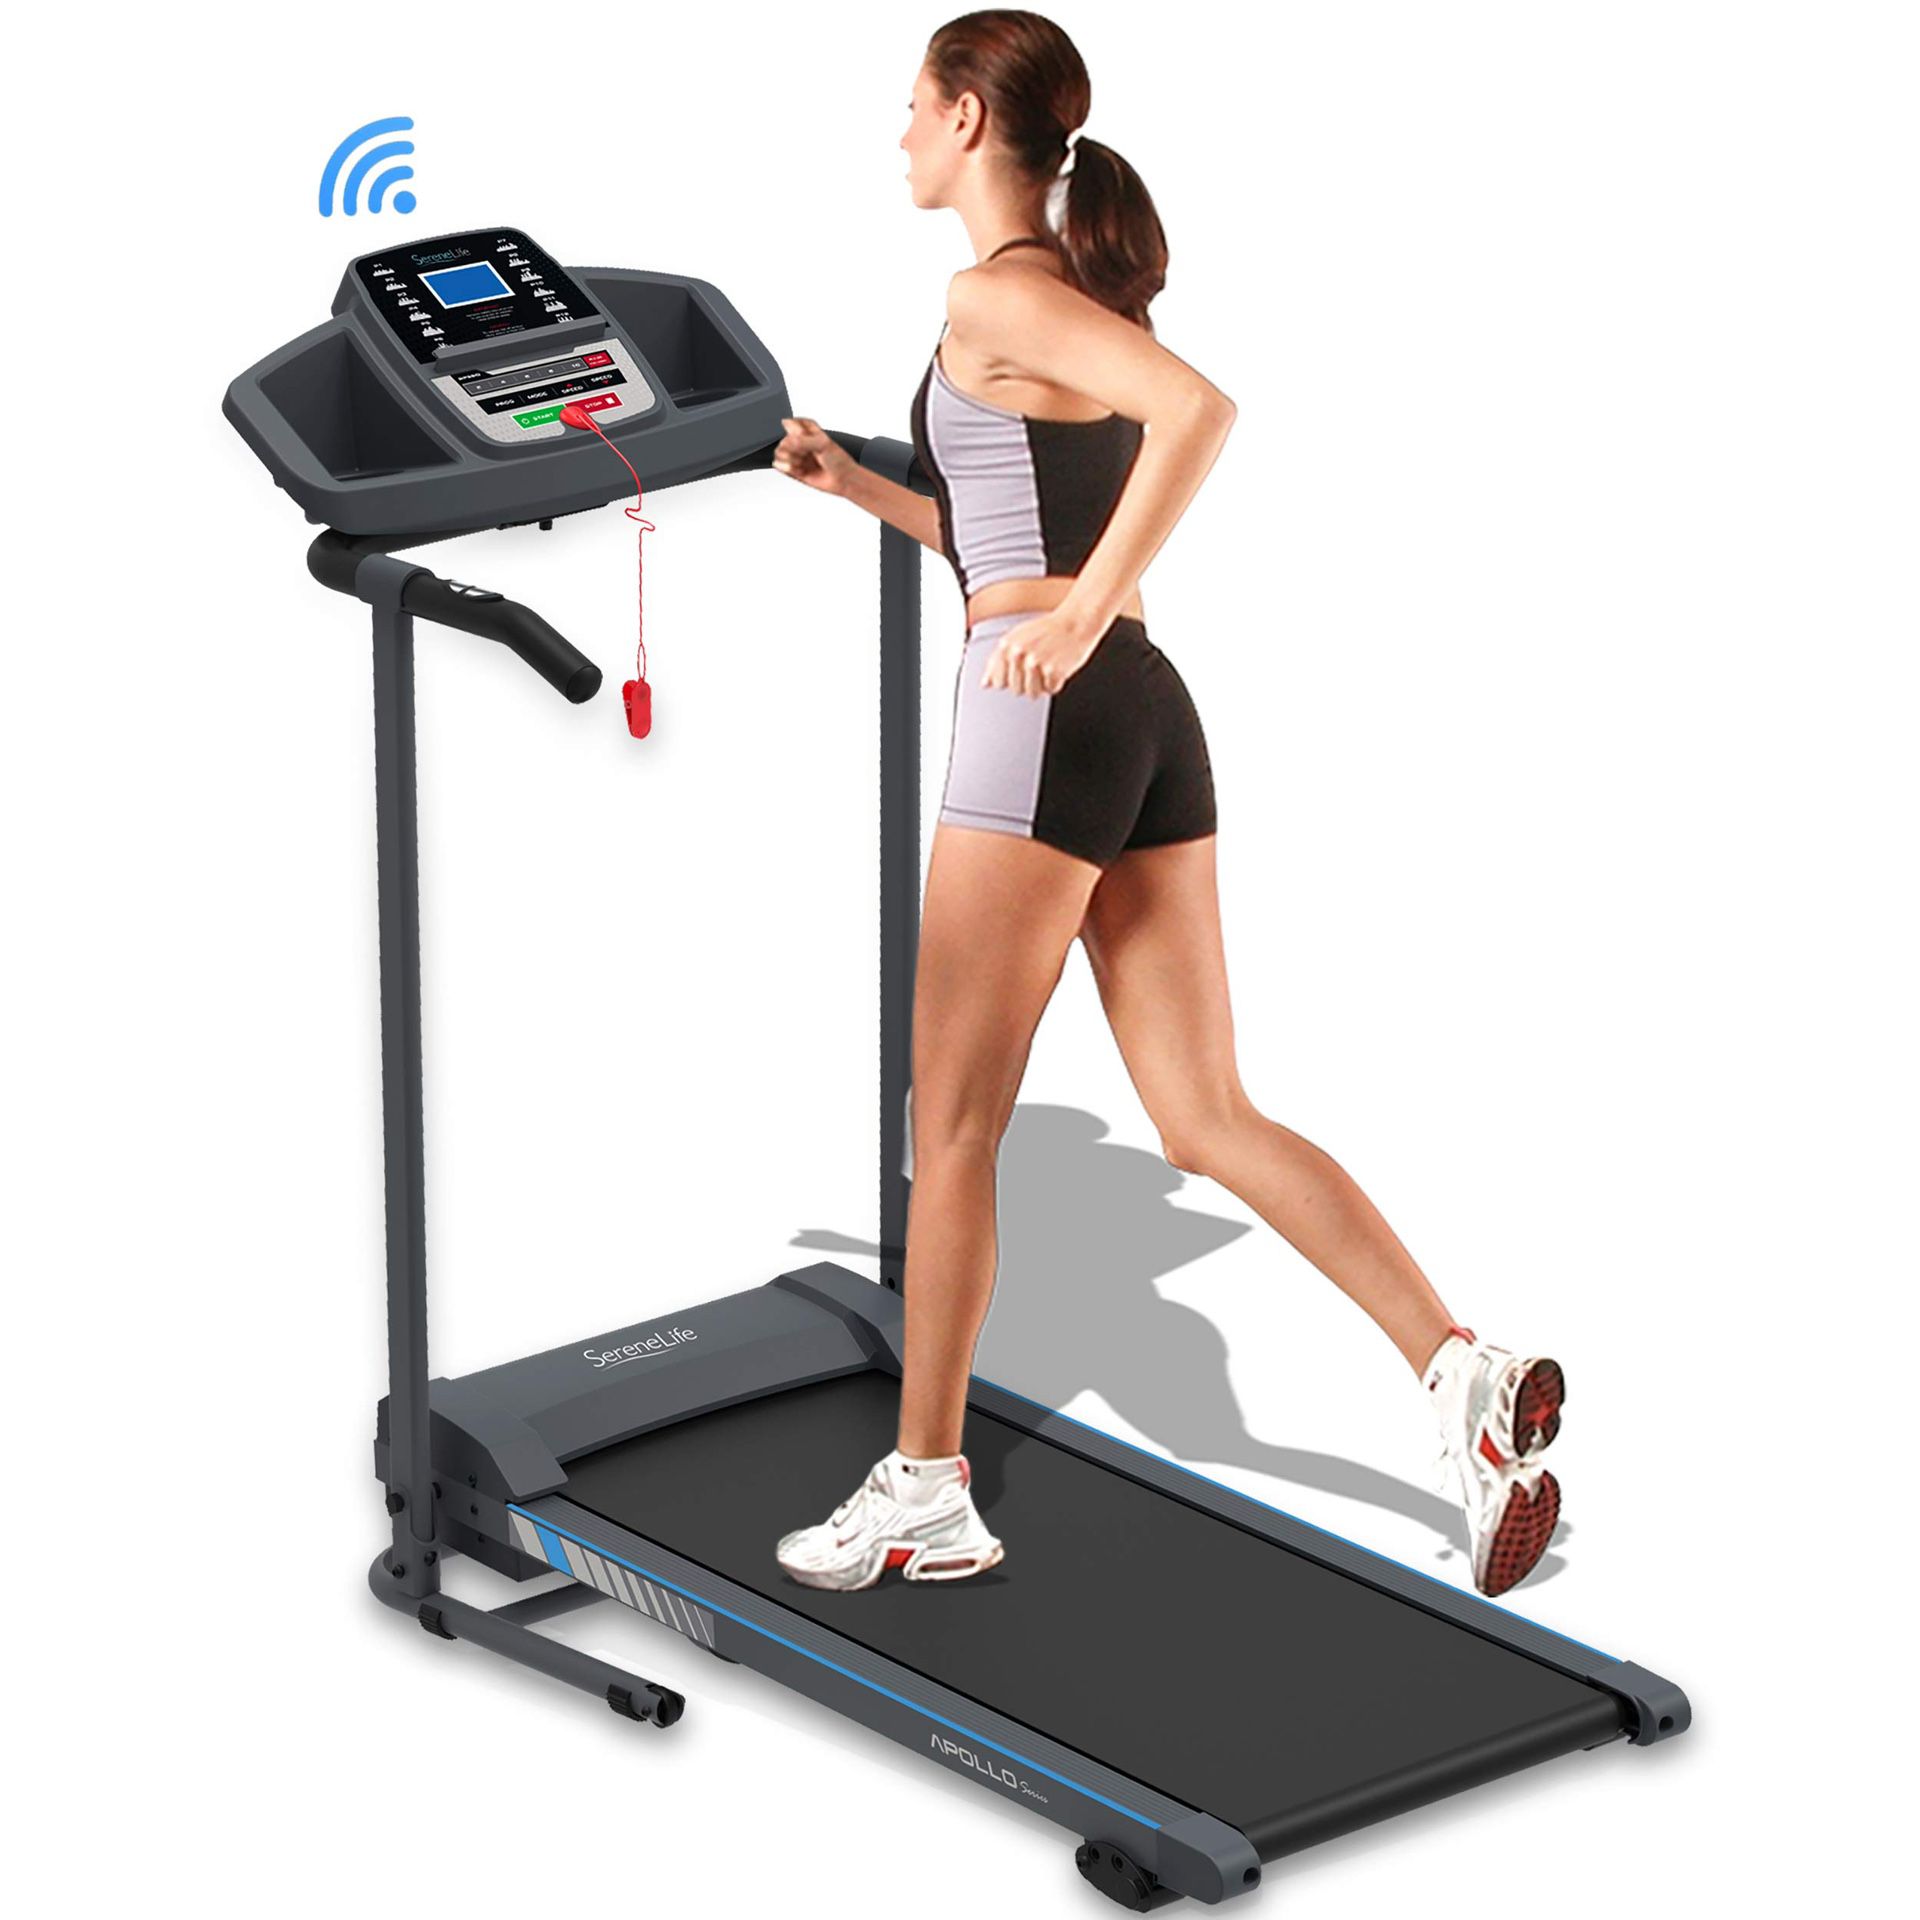 SereneLife Smart Electric Folding Treadmill – Easy Assembly Fitness Motorized Running Jogging Exercise Machine with Manual Incline Adjustment, 12 Pres